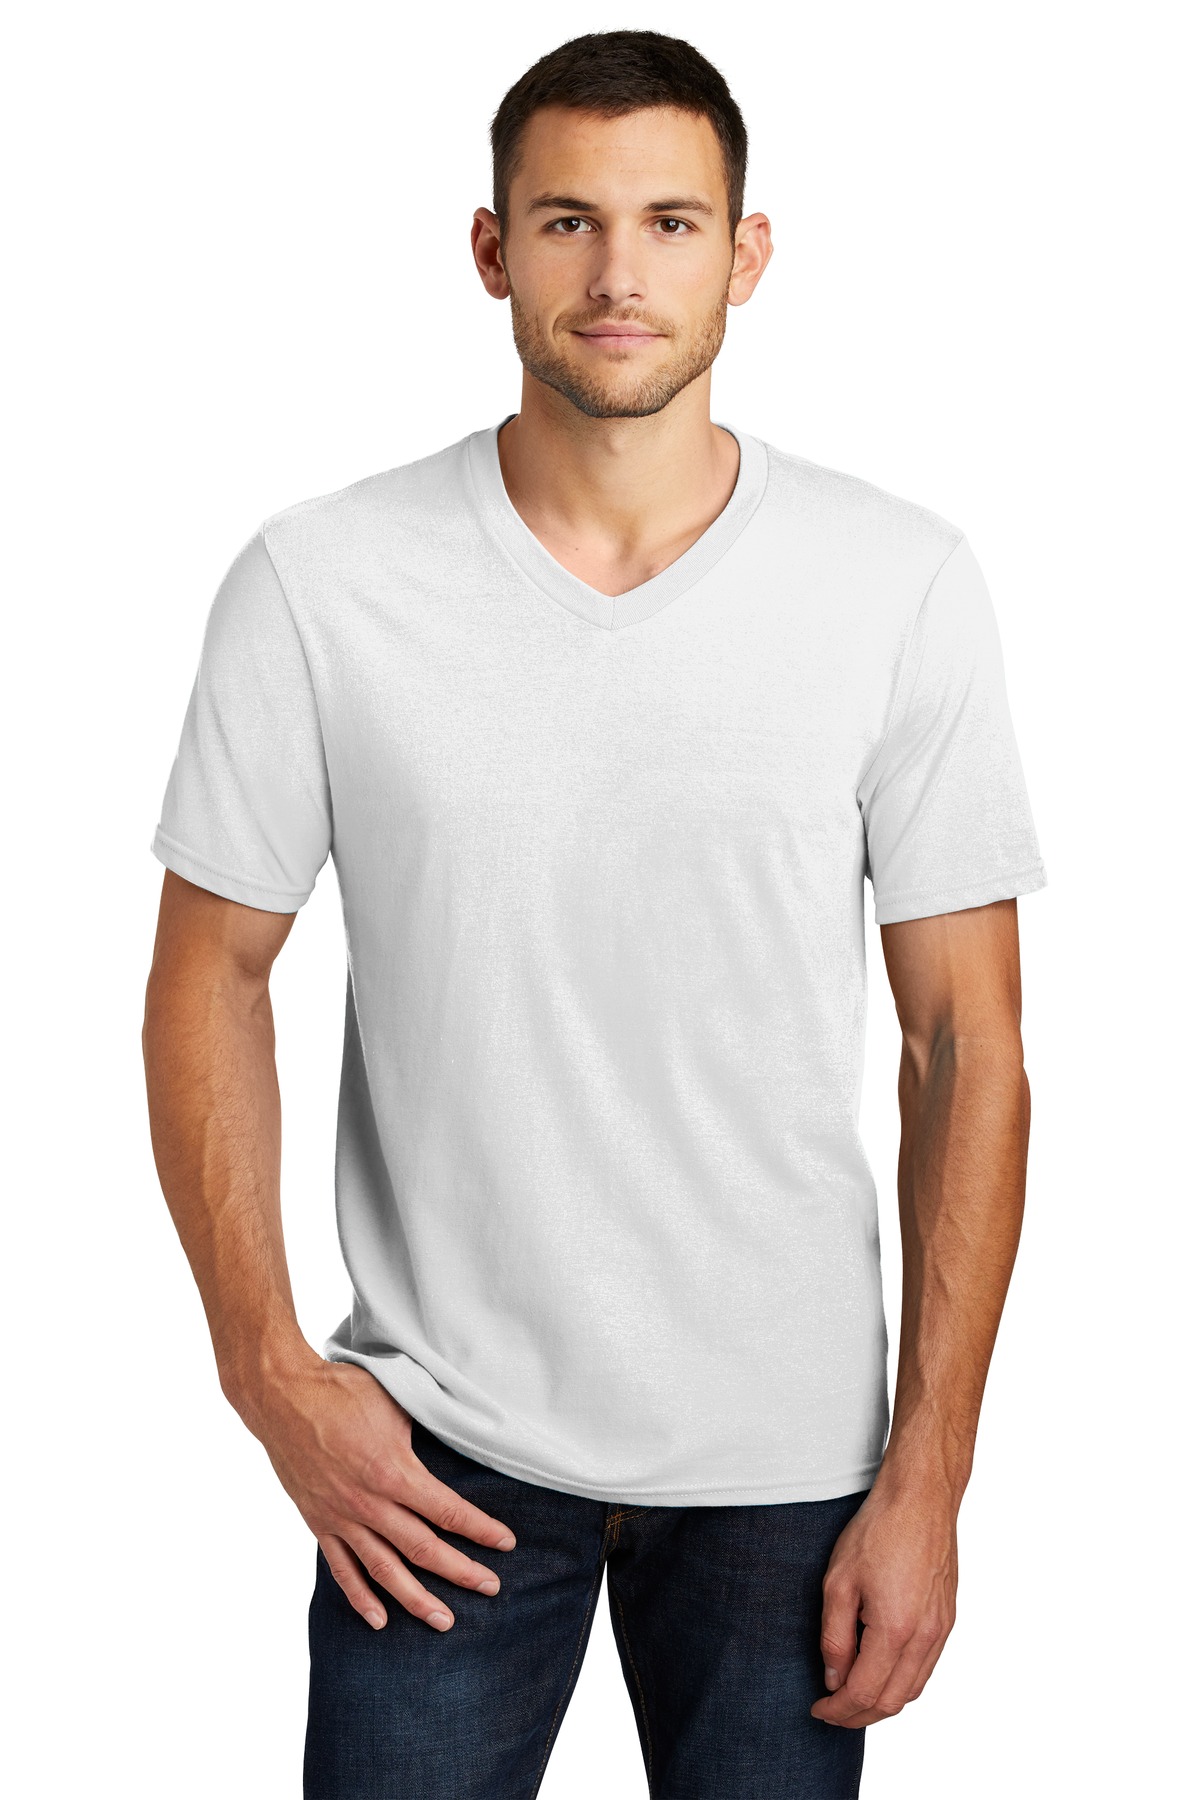 District Very Important Tee V-Neck-District